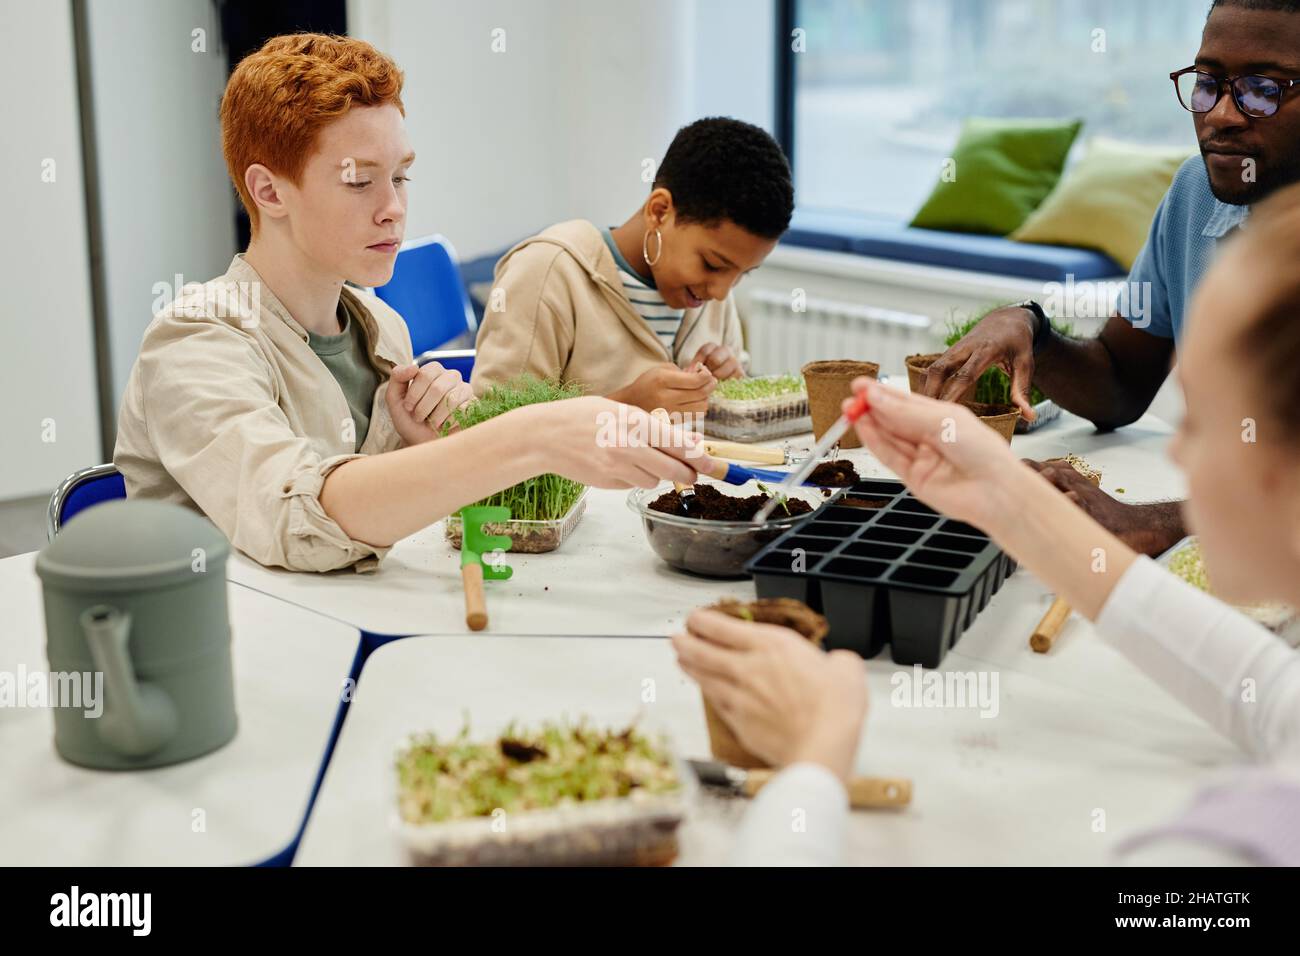 Diverse group of children planting seeds while experimenting during biology class in school Stock Photo